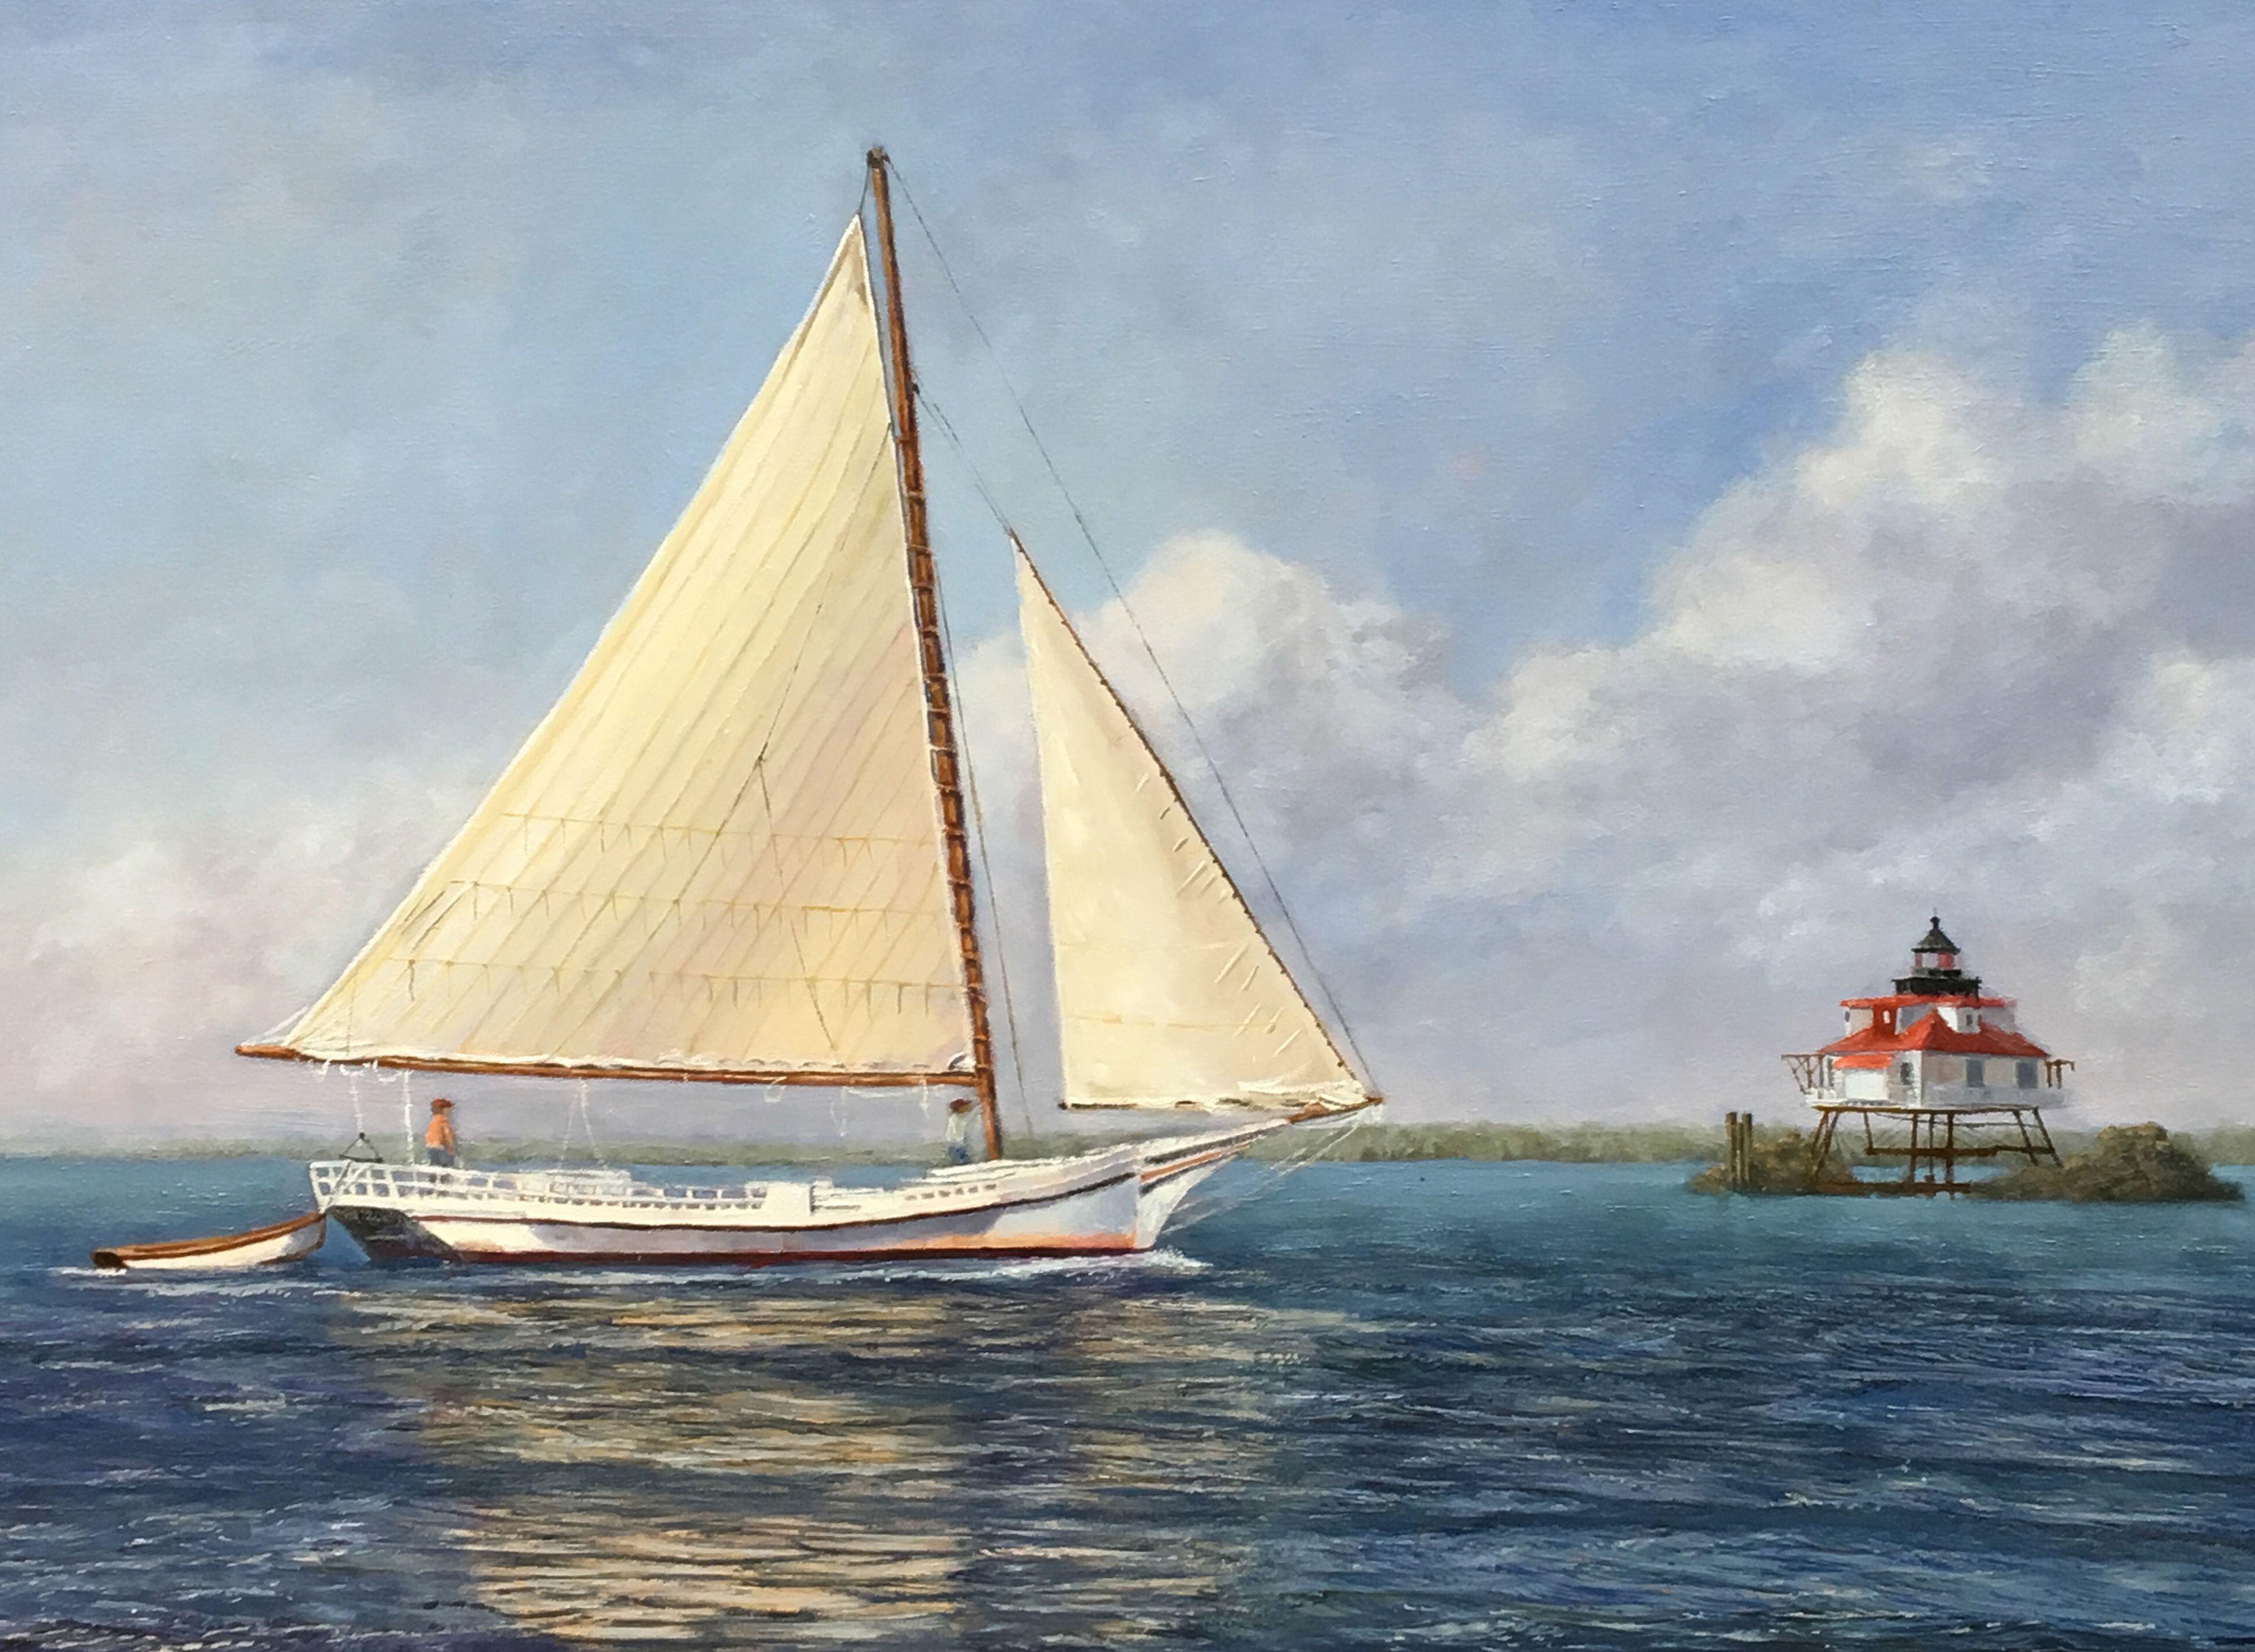 AWARD WINNER    Winner of The Karan Family Seascape Award at the Allied Artists of America 108th Juried Exhibition at the Salmungundi Club in NYC, this painting depicts a Skipjack, or Chesapeake Bay oyster boat sailing past a lighthouse only seen on